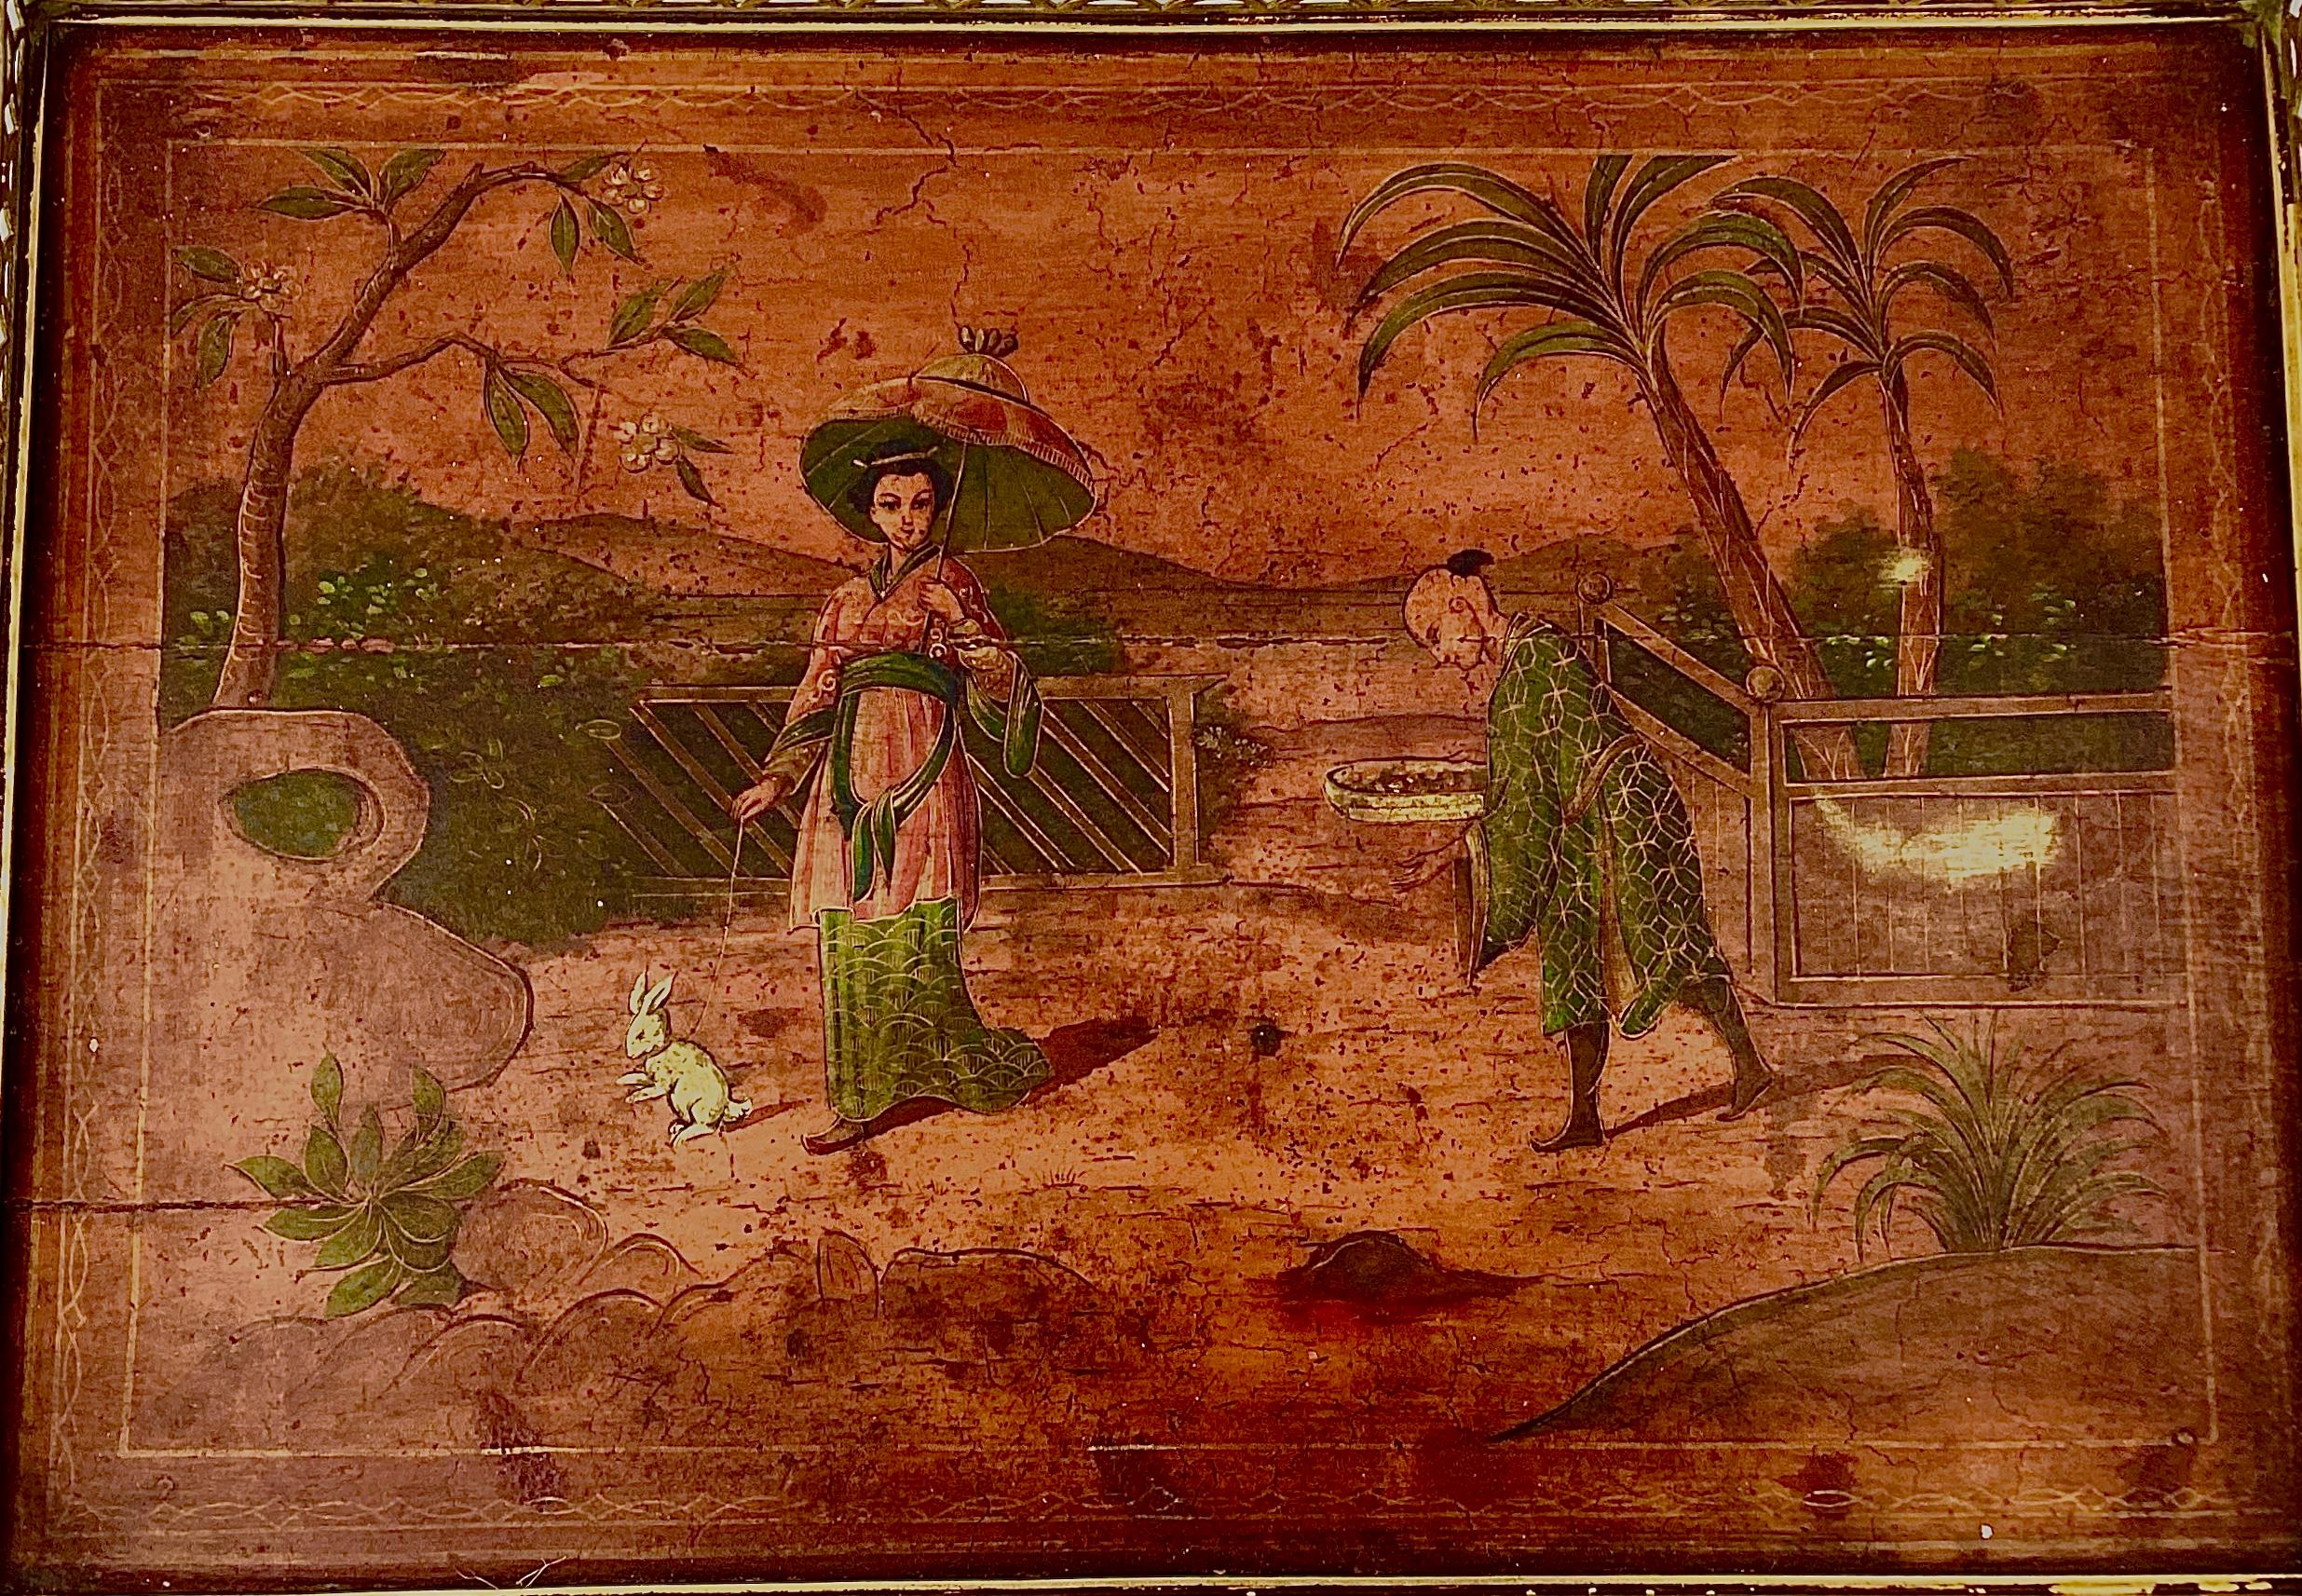 19th Century English Chinoiserie wooden side table with brass trim. Beautiful Asian scene with man, woman and her pet rabbit in an outdoor setting. This table can be used in any decor, in any room. 